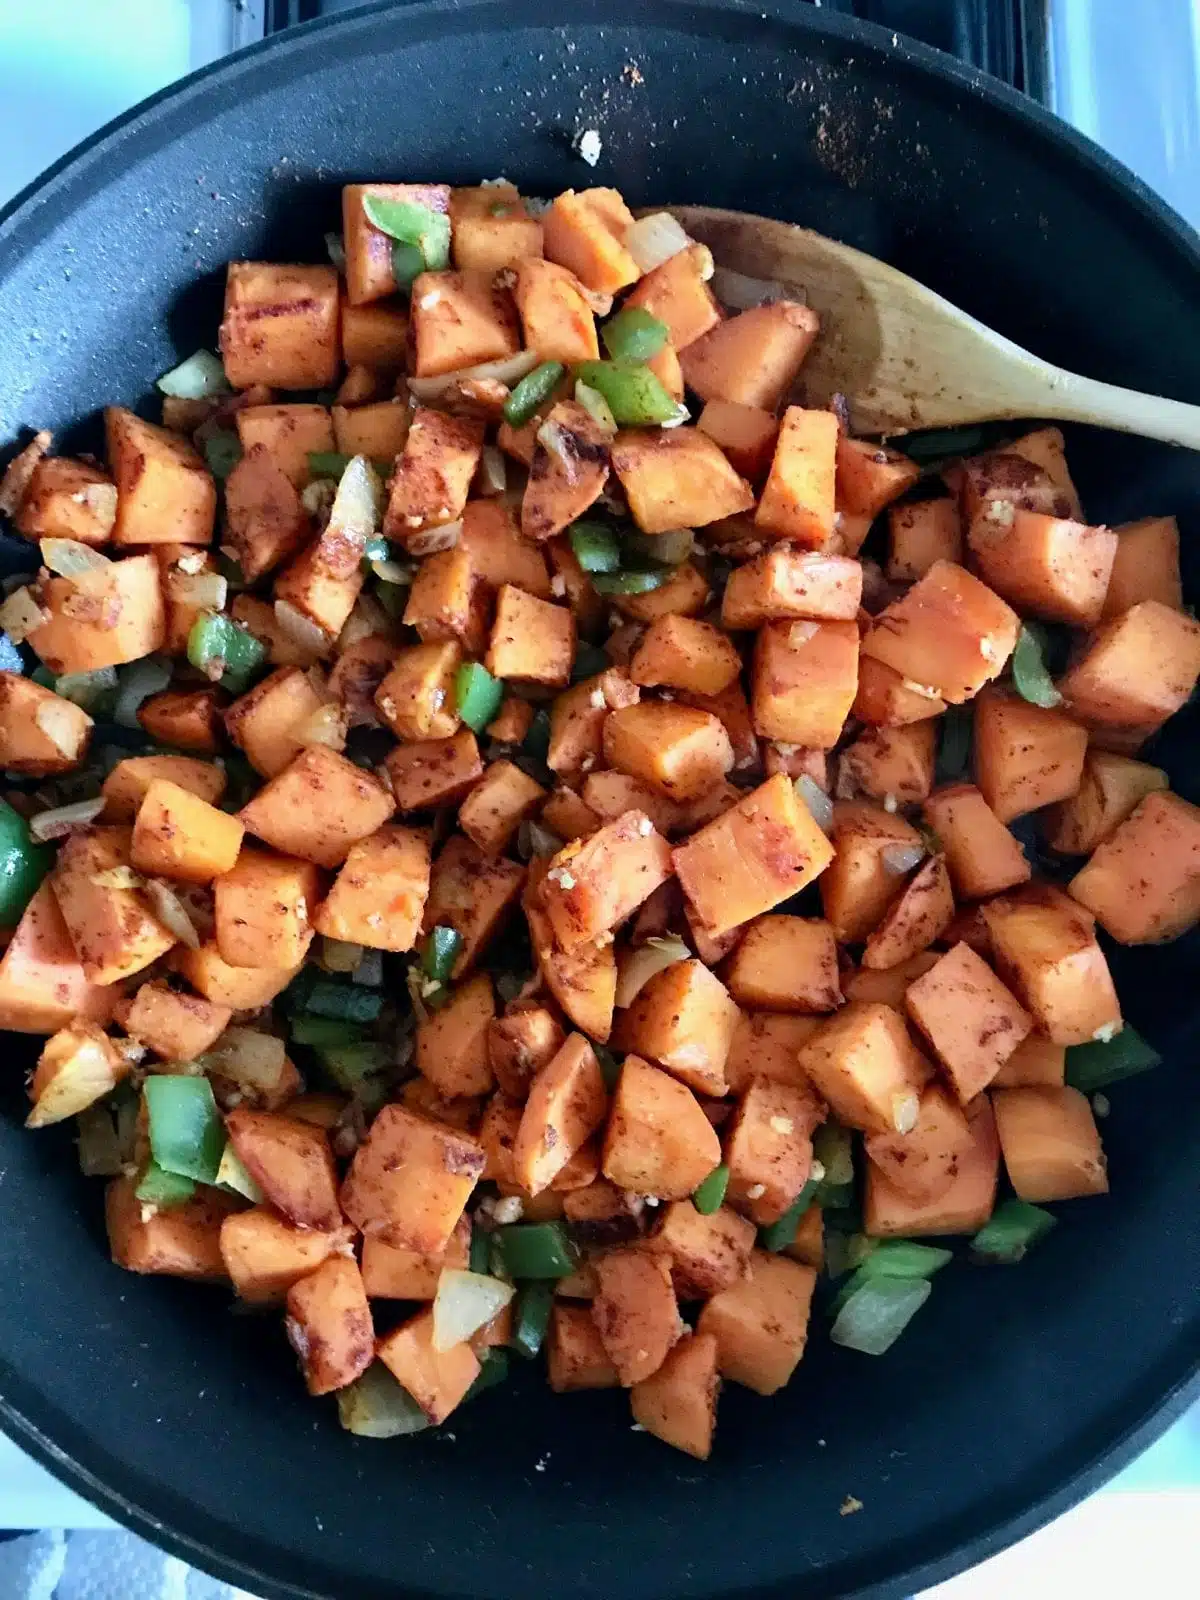 chopped sweet potatoes, green bell peppers, onion, and garlic in a skillet.